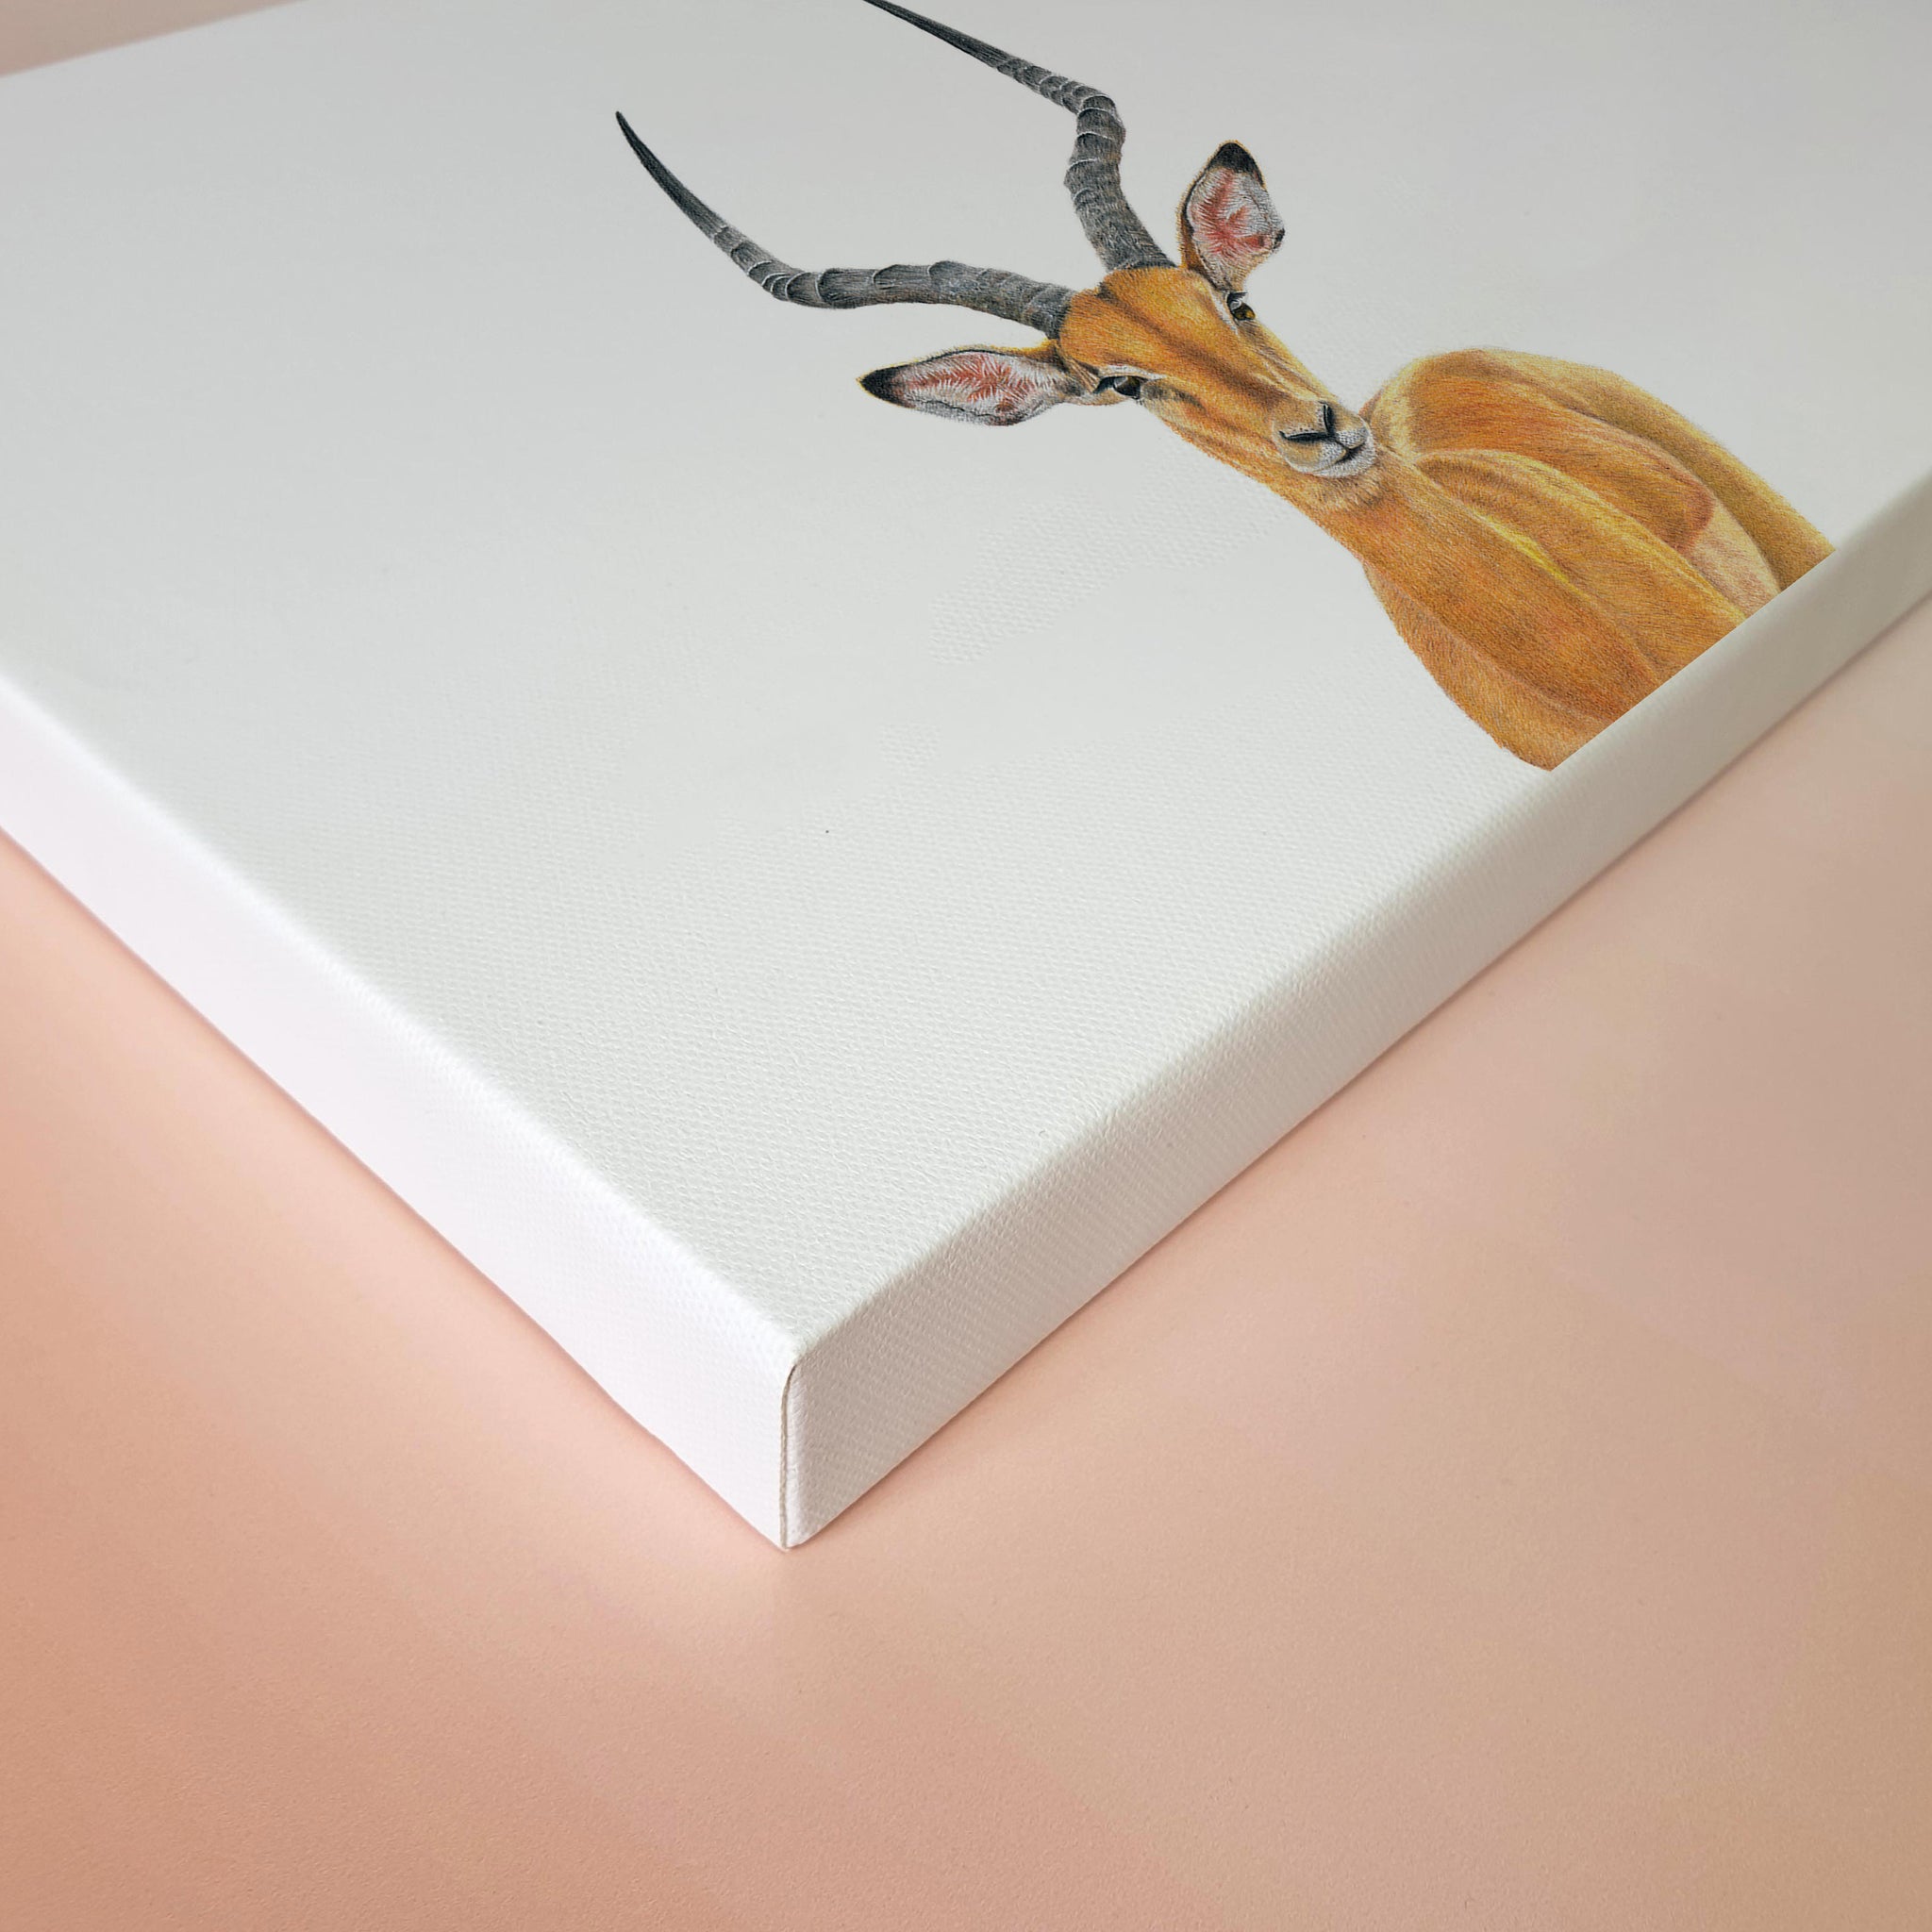 Male Impala with large horns canvas artwork by Matthew Bell